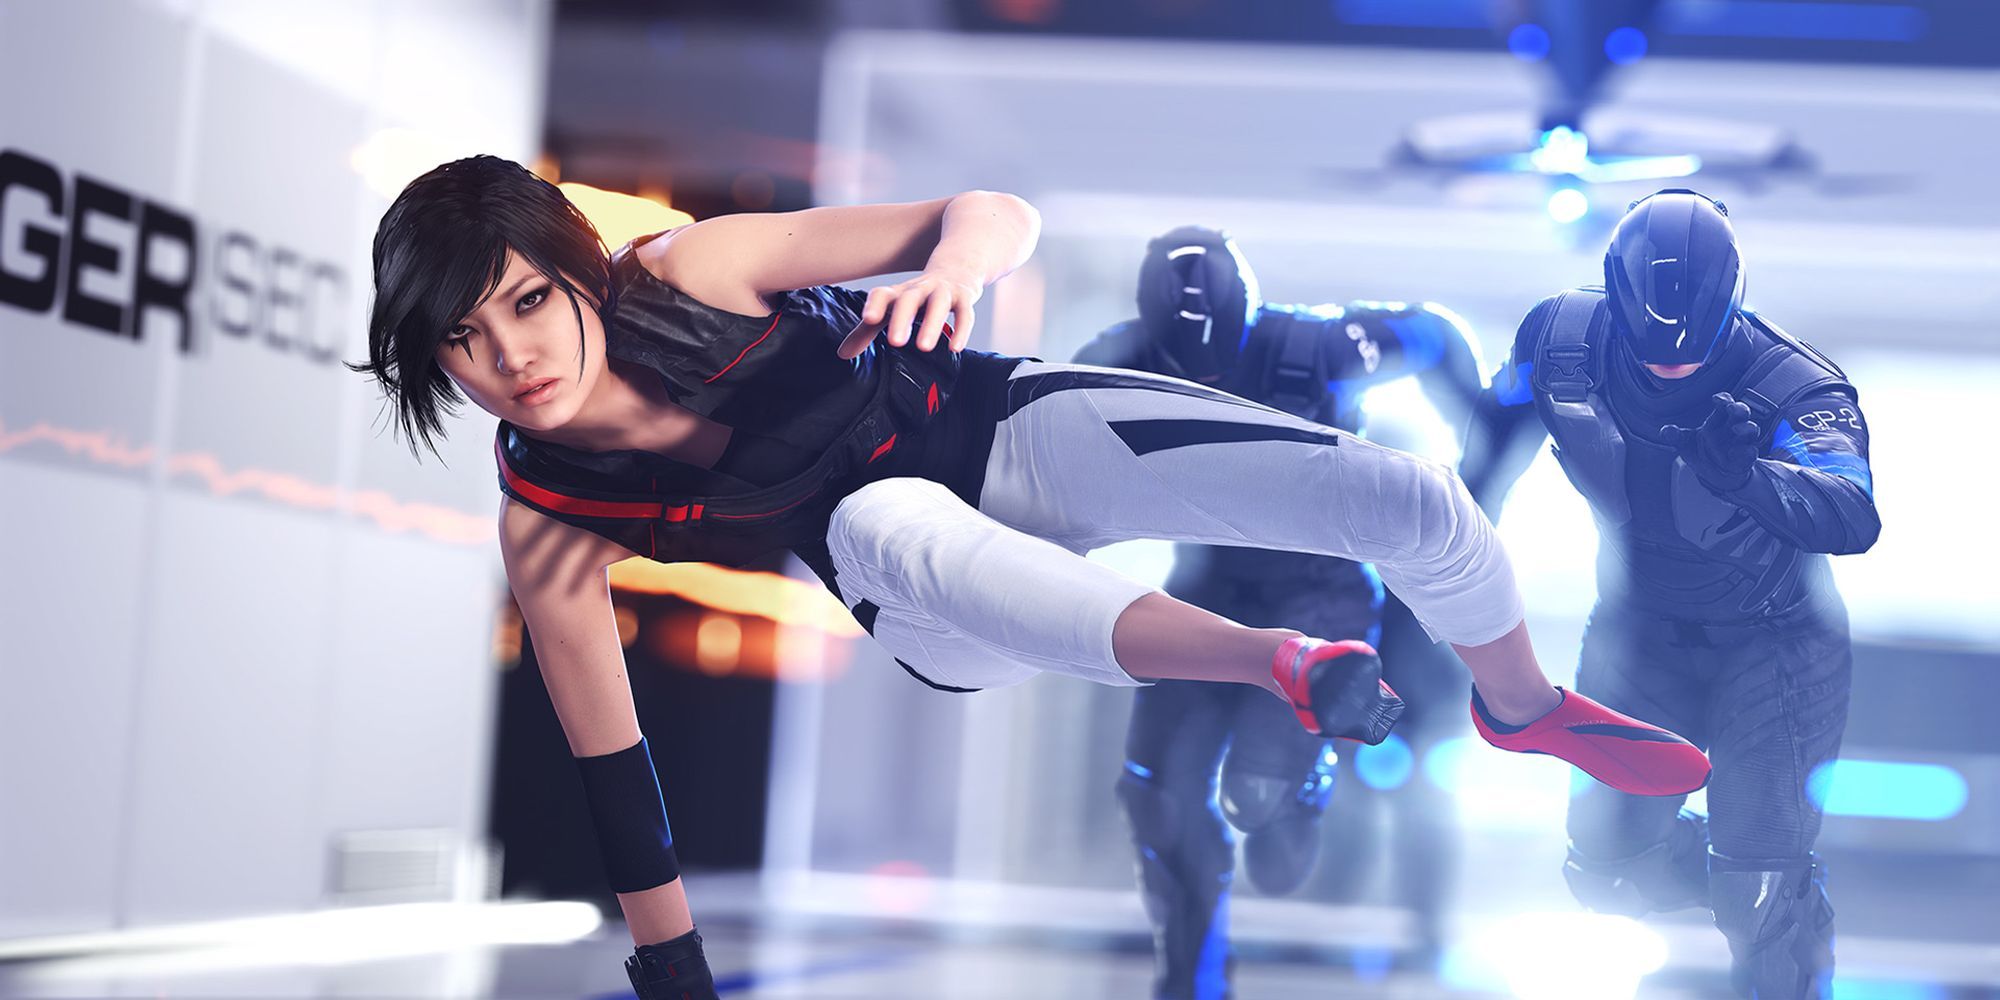 Mirror's Edge cutscene snippet: faith running away from guards